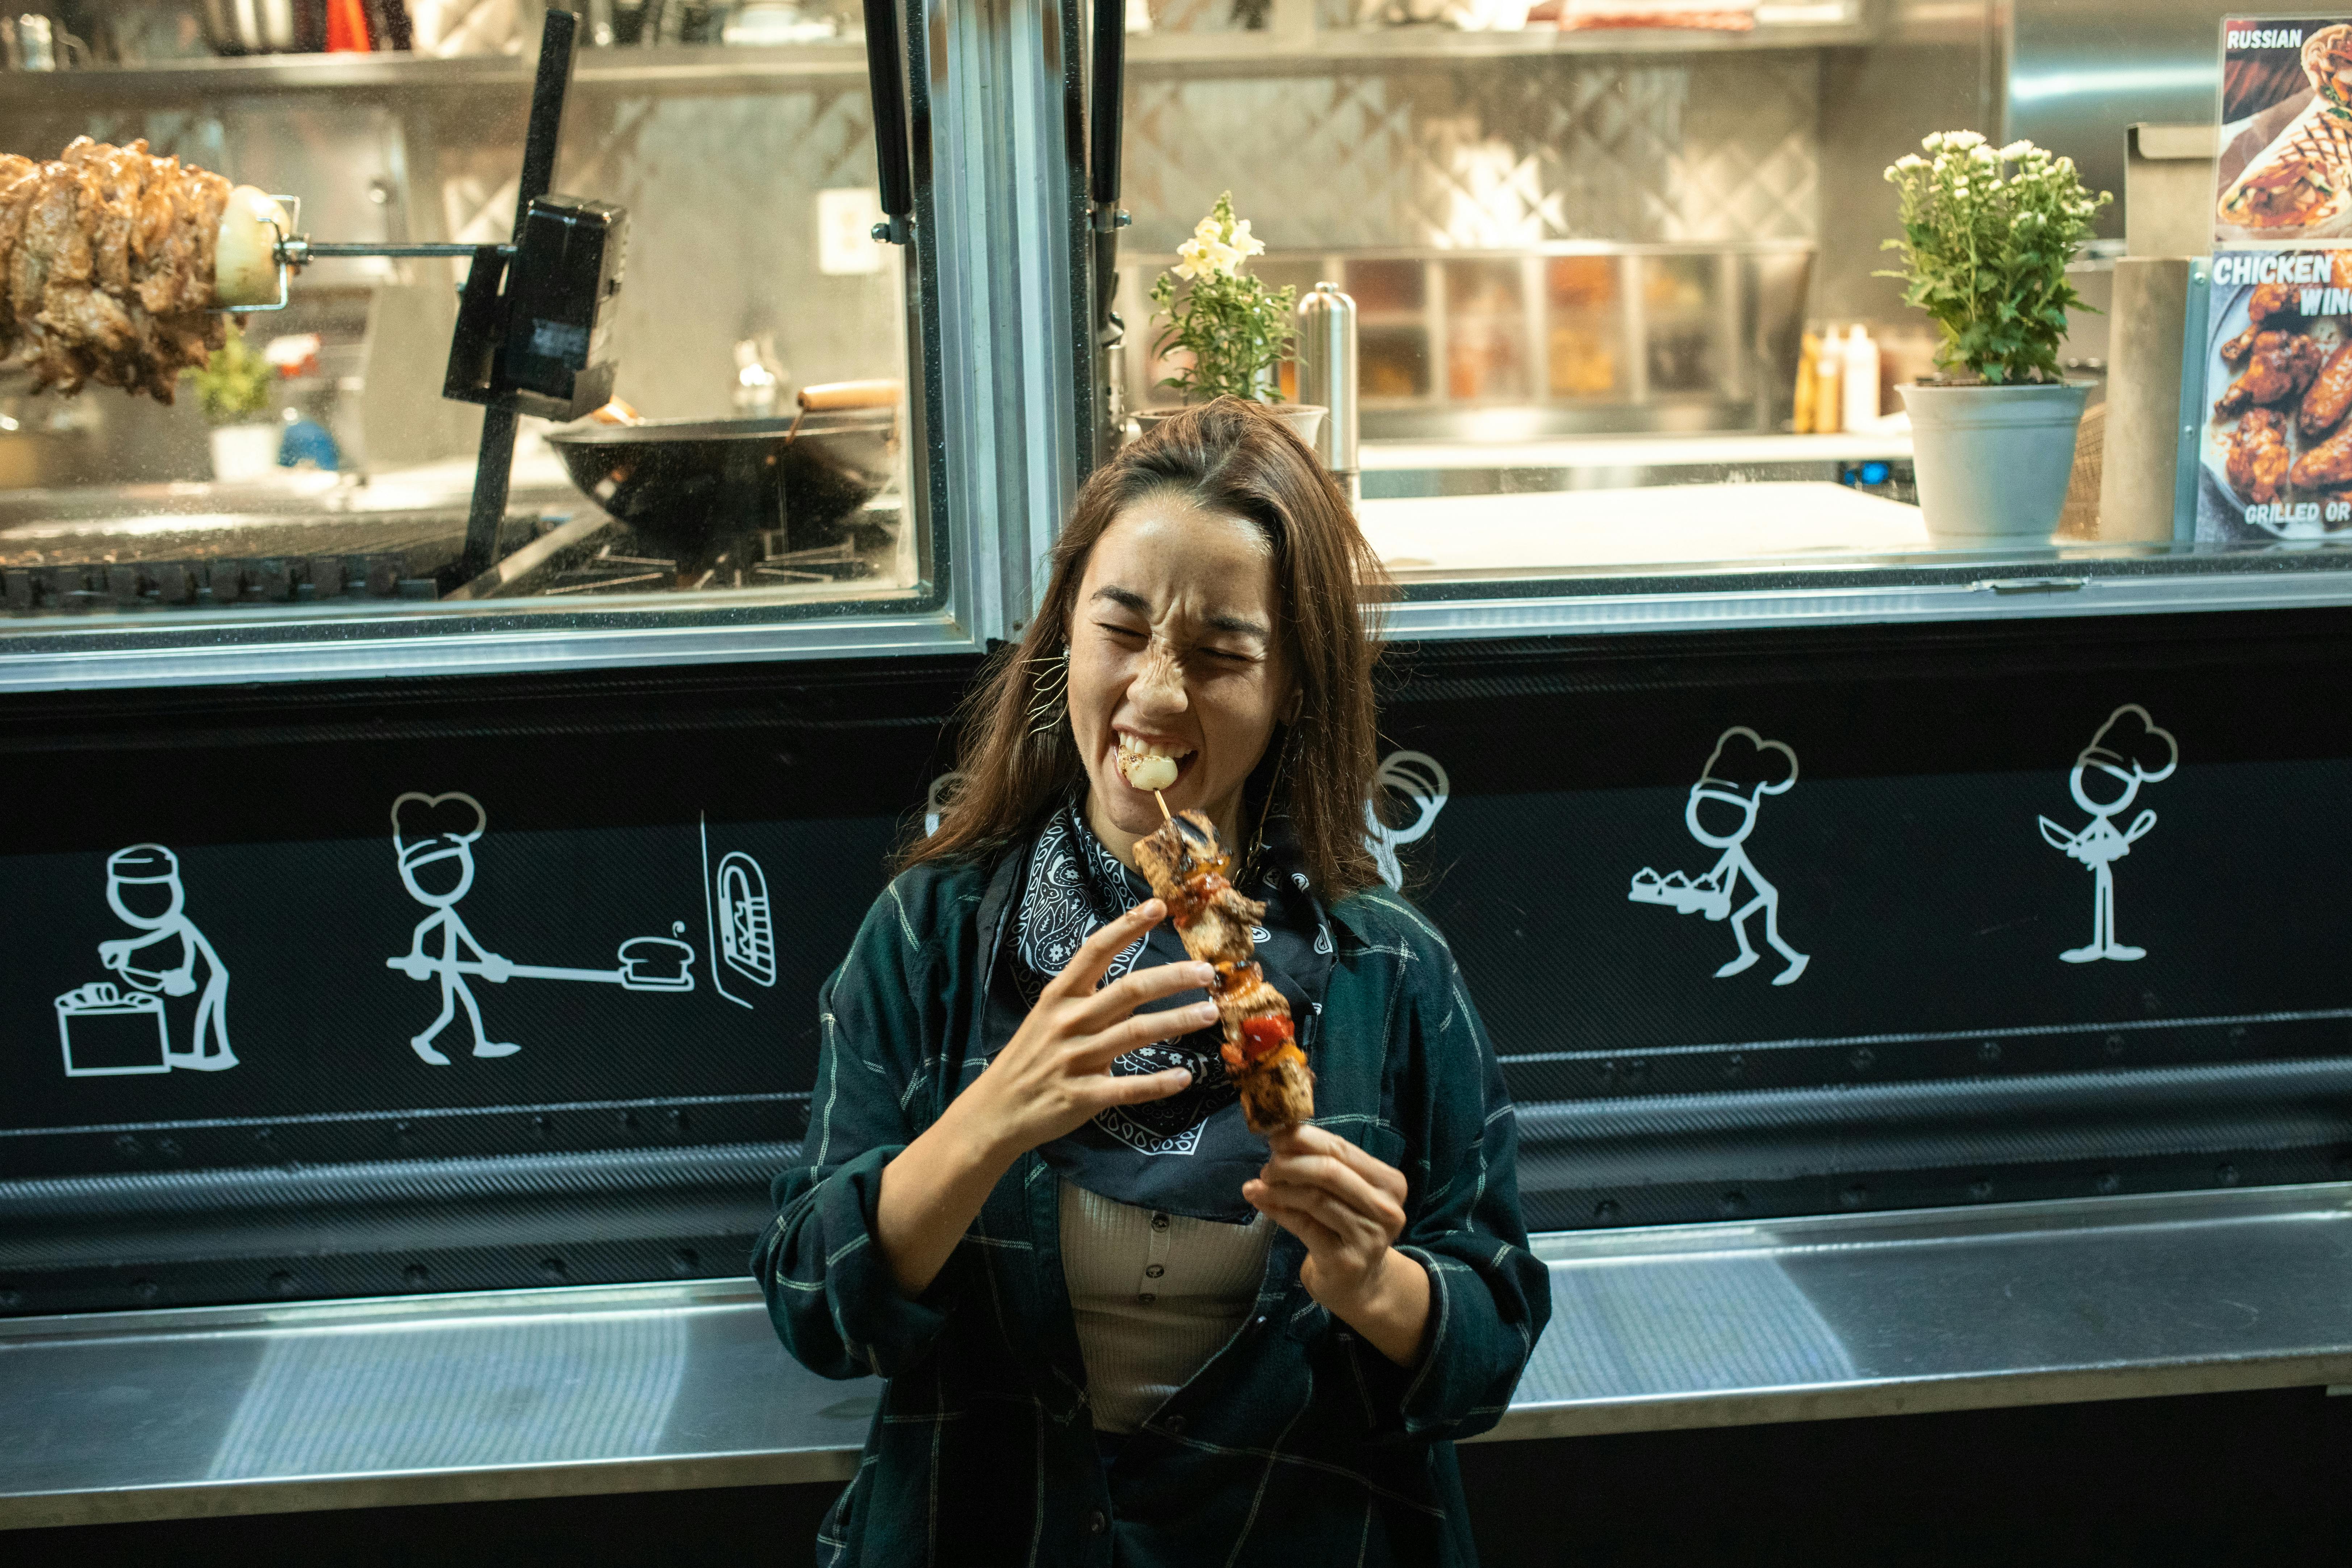 a woman eating a kebab in front of a food truck